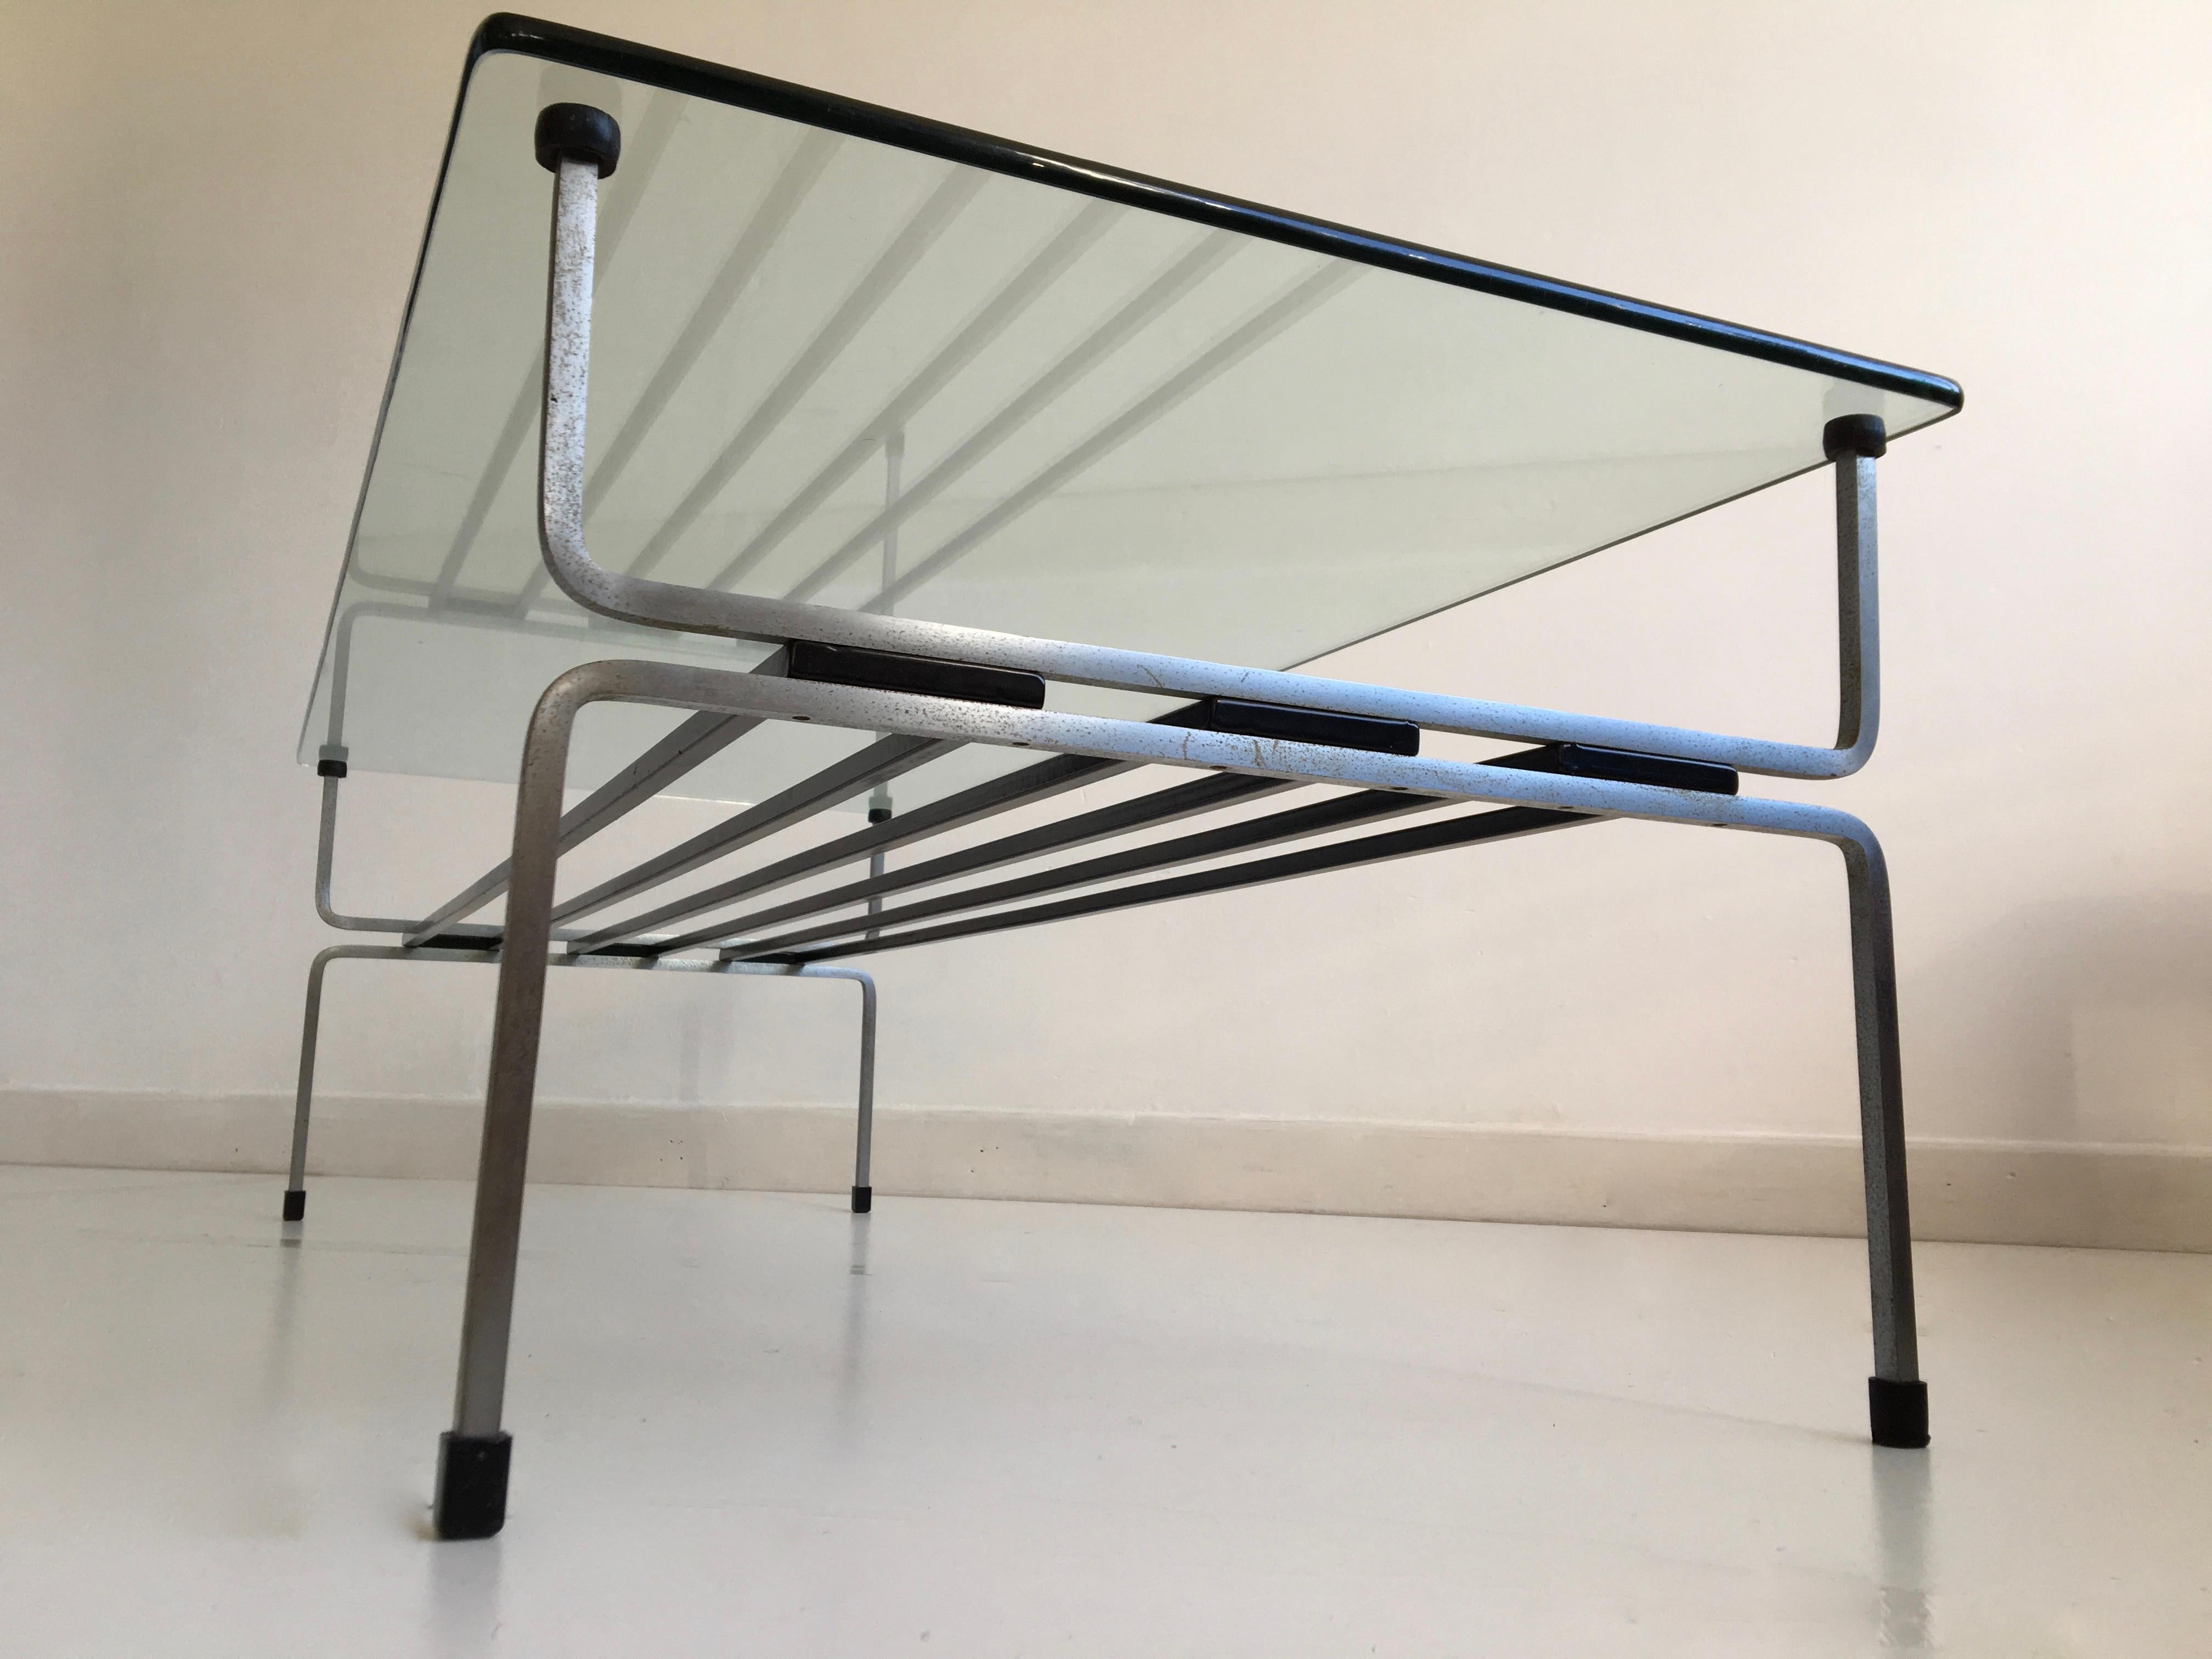 Exquisite steel and glass coffee table by seminal post war English designer William Plunkett.

Dimensions (cm, approximate):
Height 36
Width 112
Depth 48

Condition: There are several scratches to the glass top and a missing plastic foot has